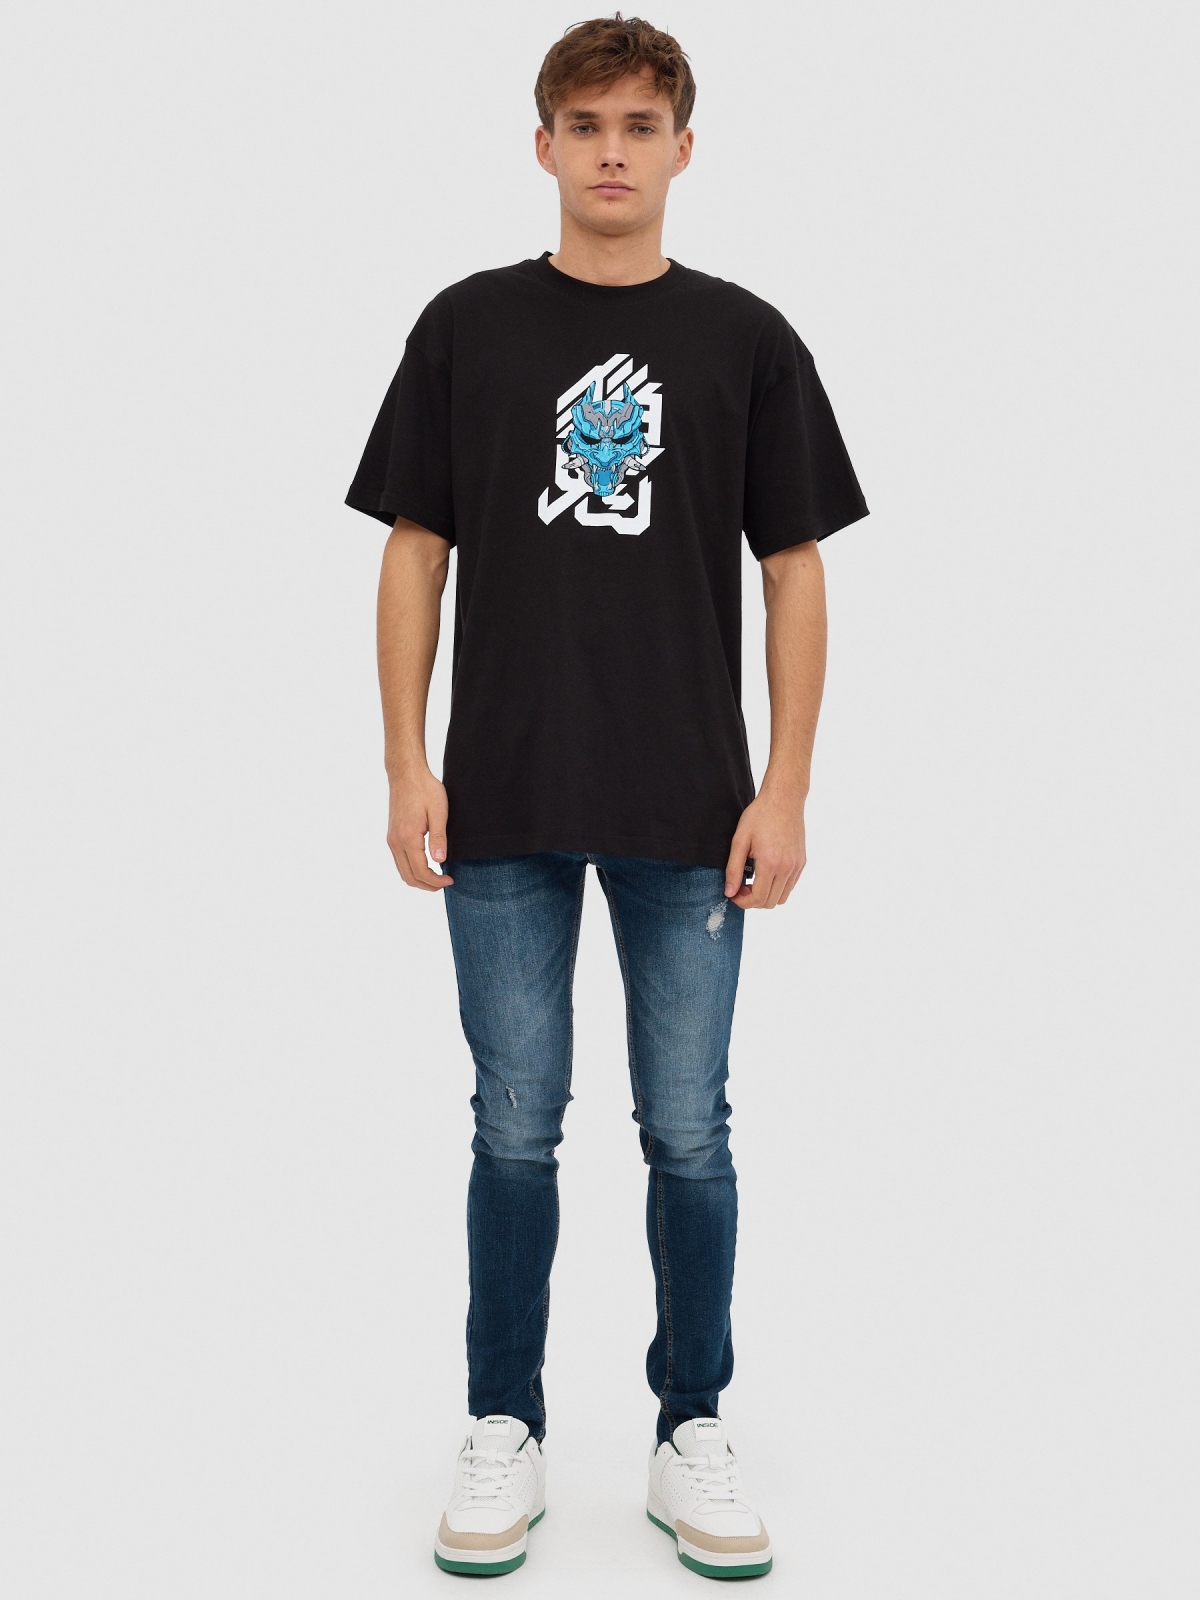 Japanese mask t-shirt black front view